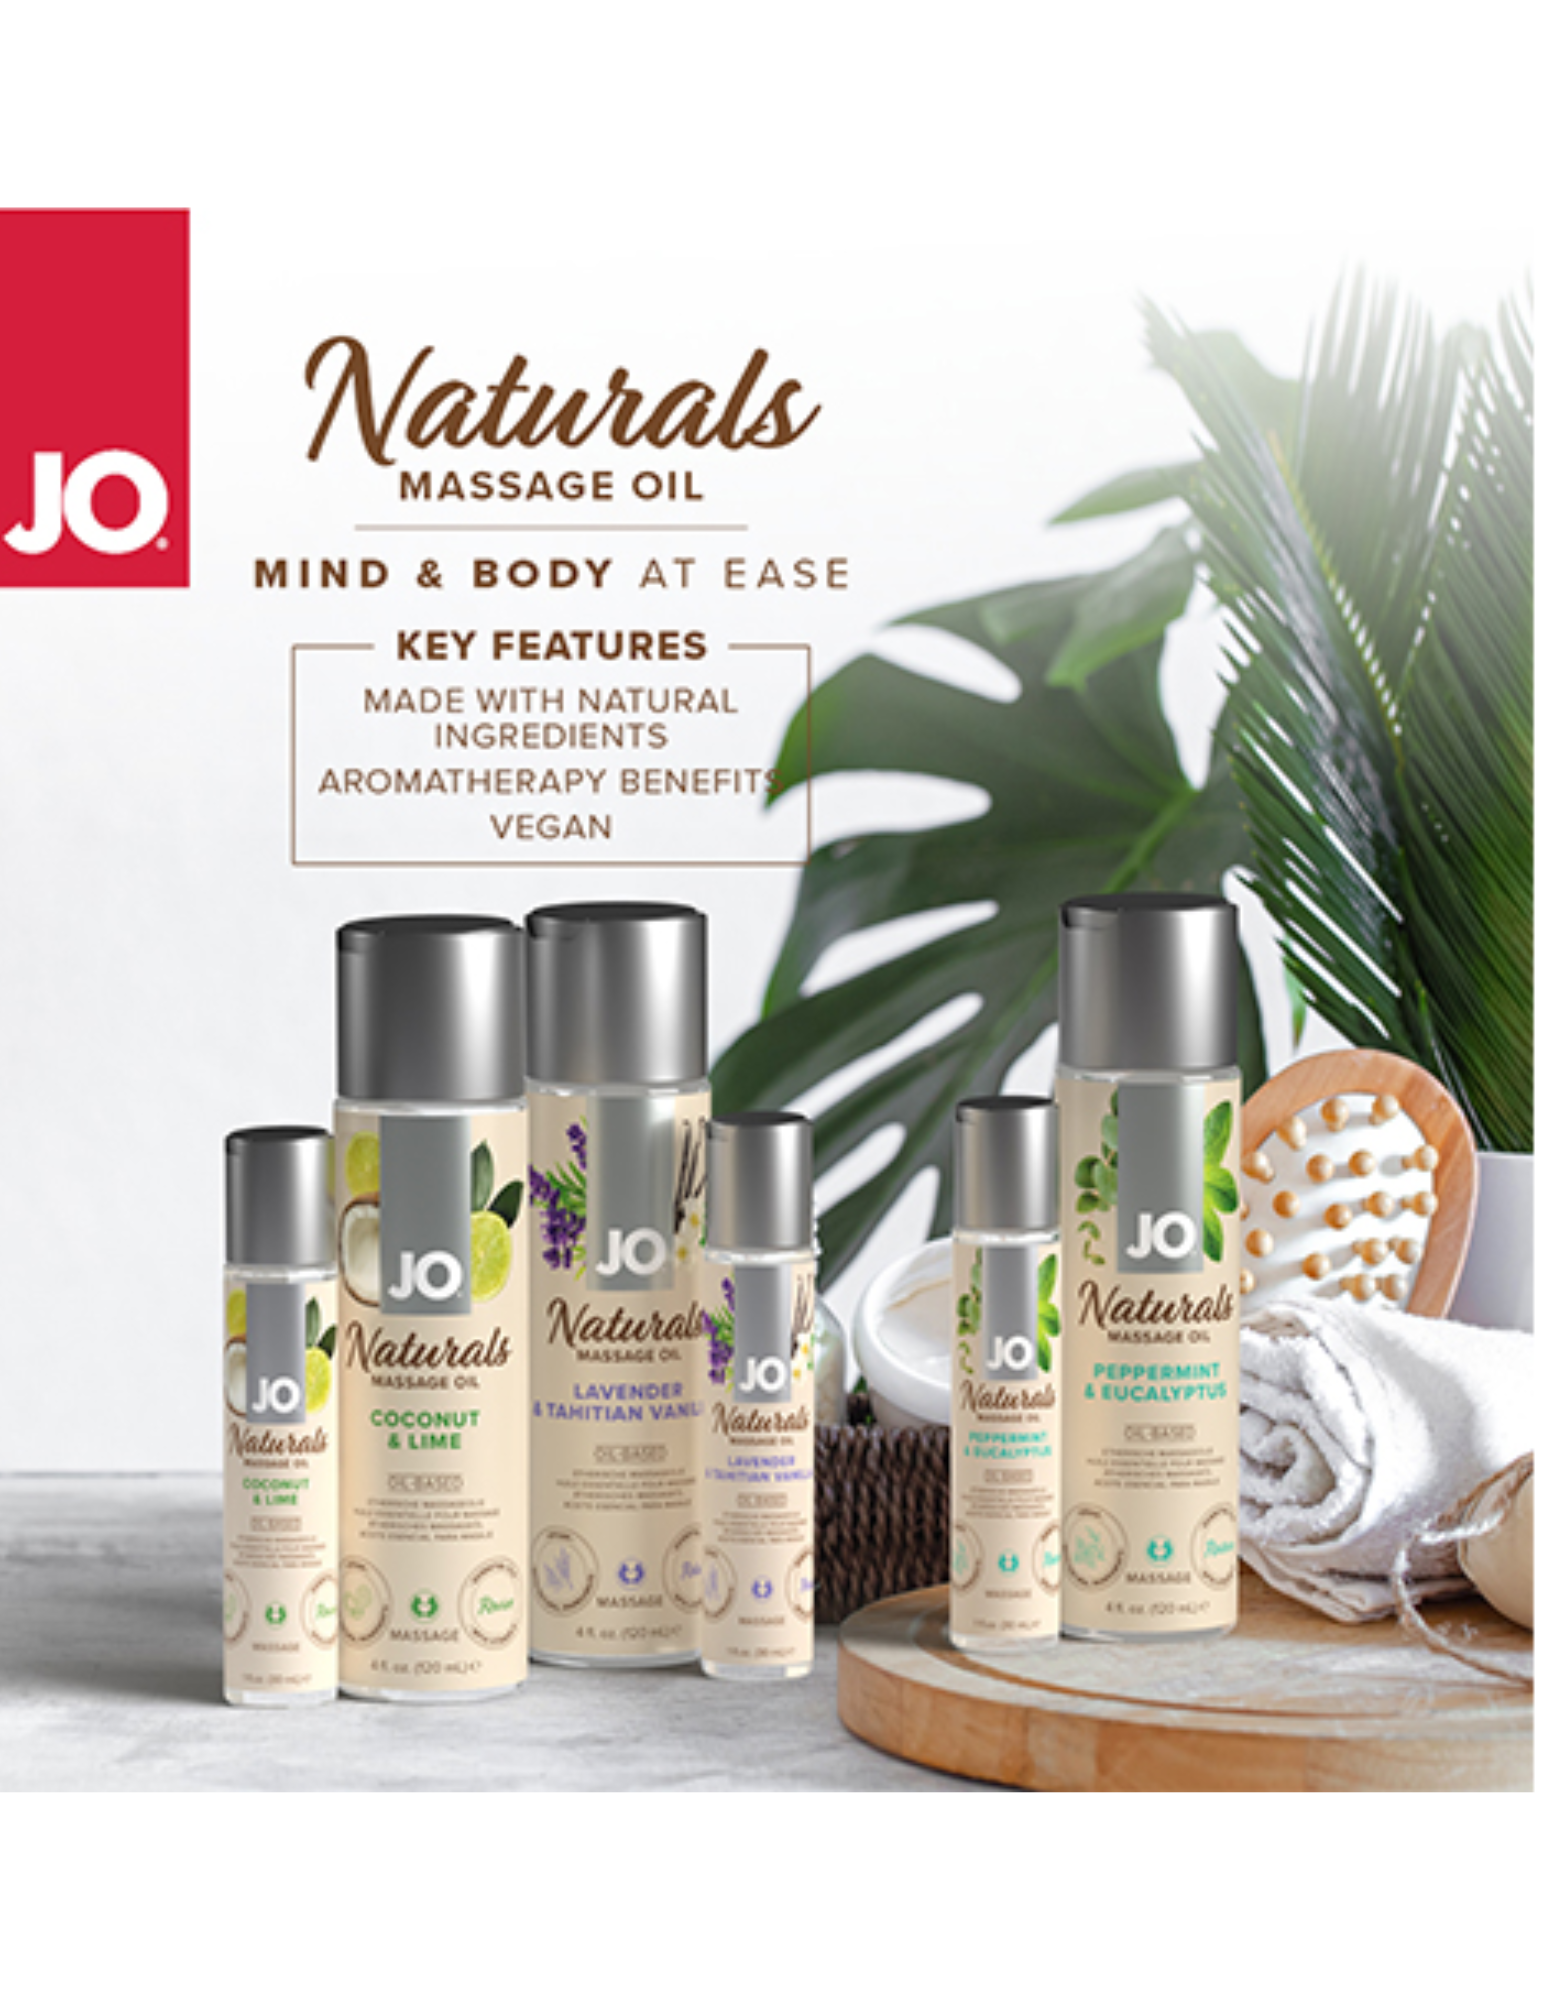 Ad for all of the scents of the System Jo Naturals Massage Oil line.